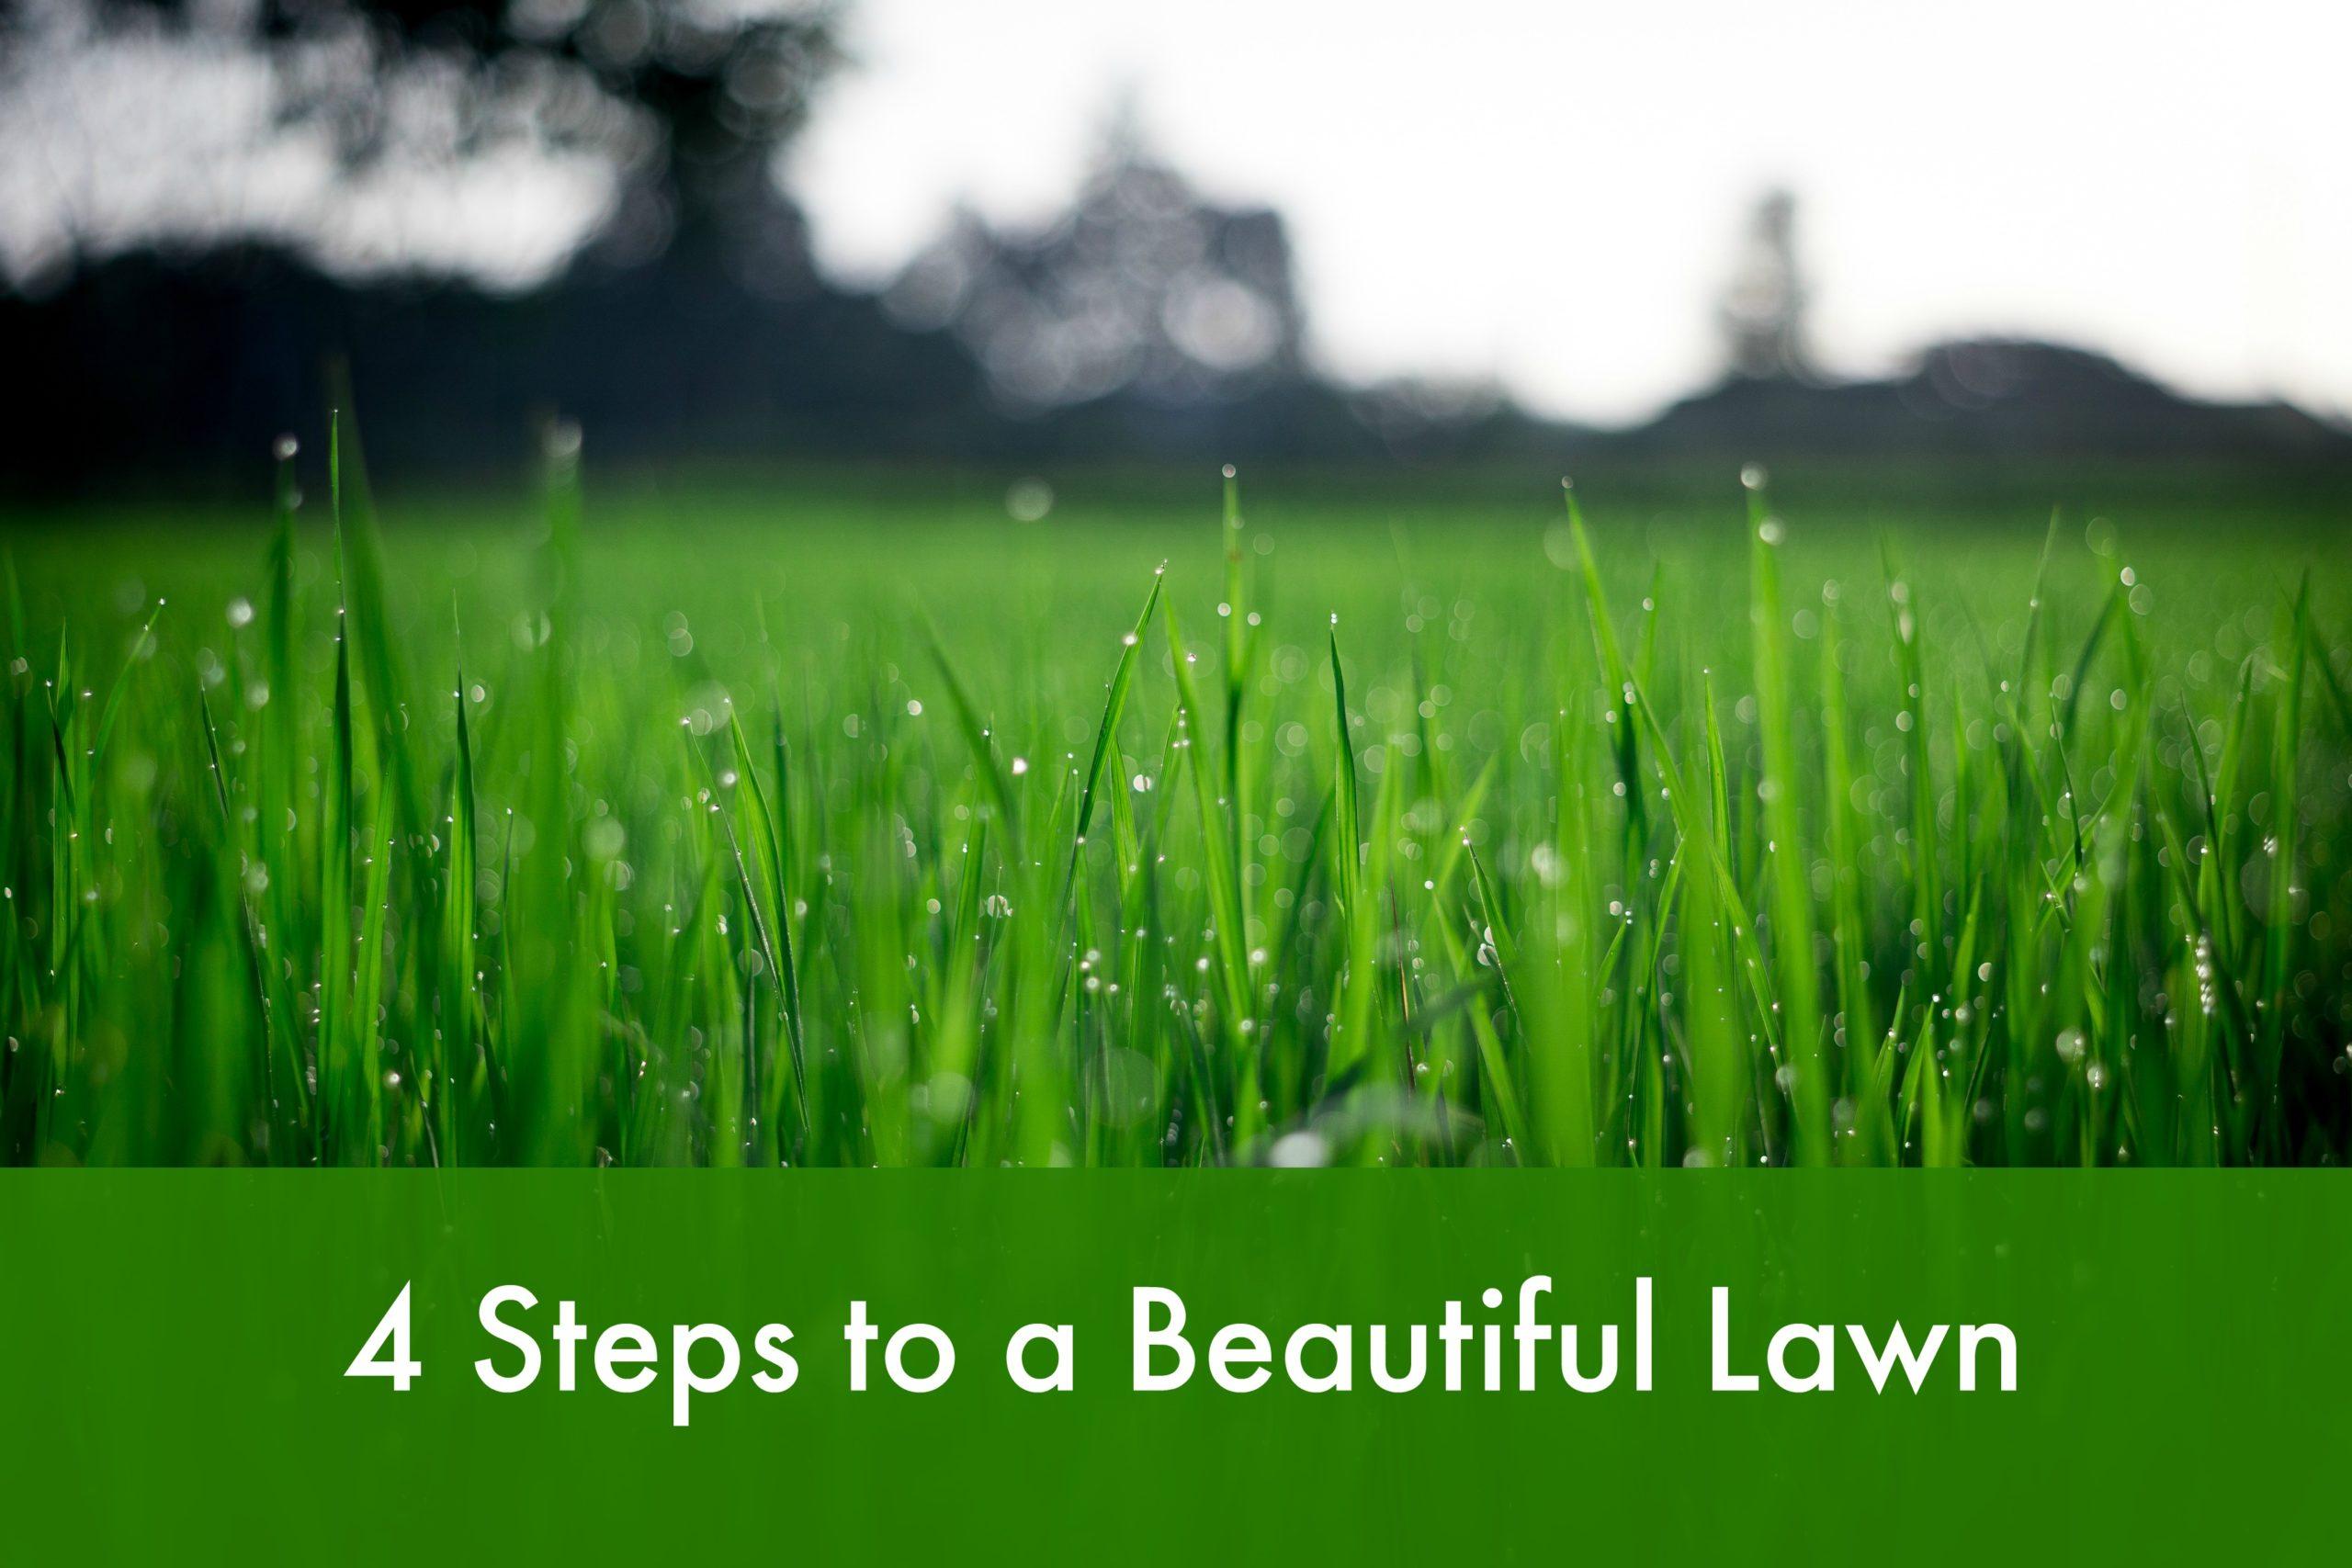 4 Steps to a Beautiful Lawn